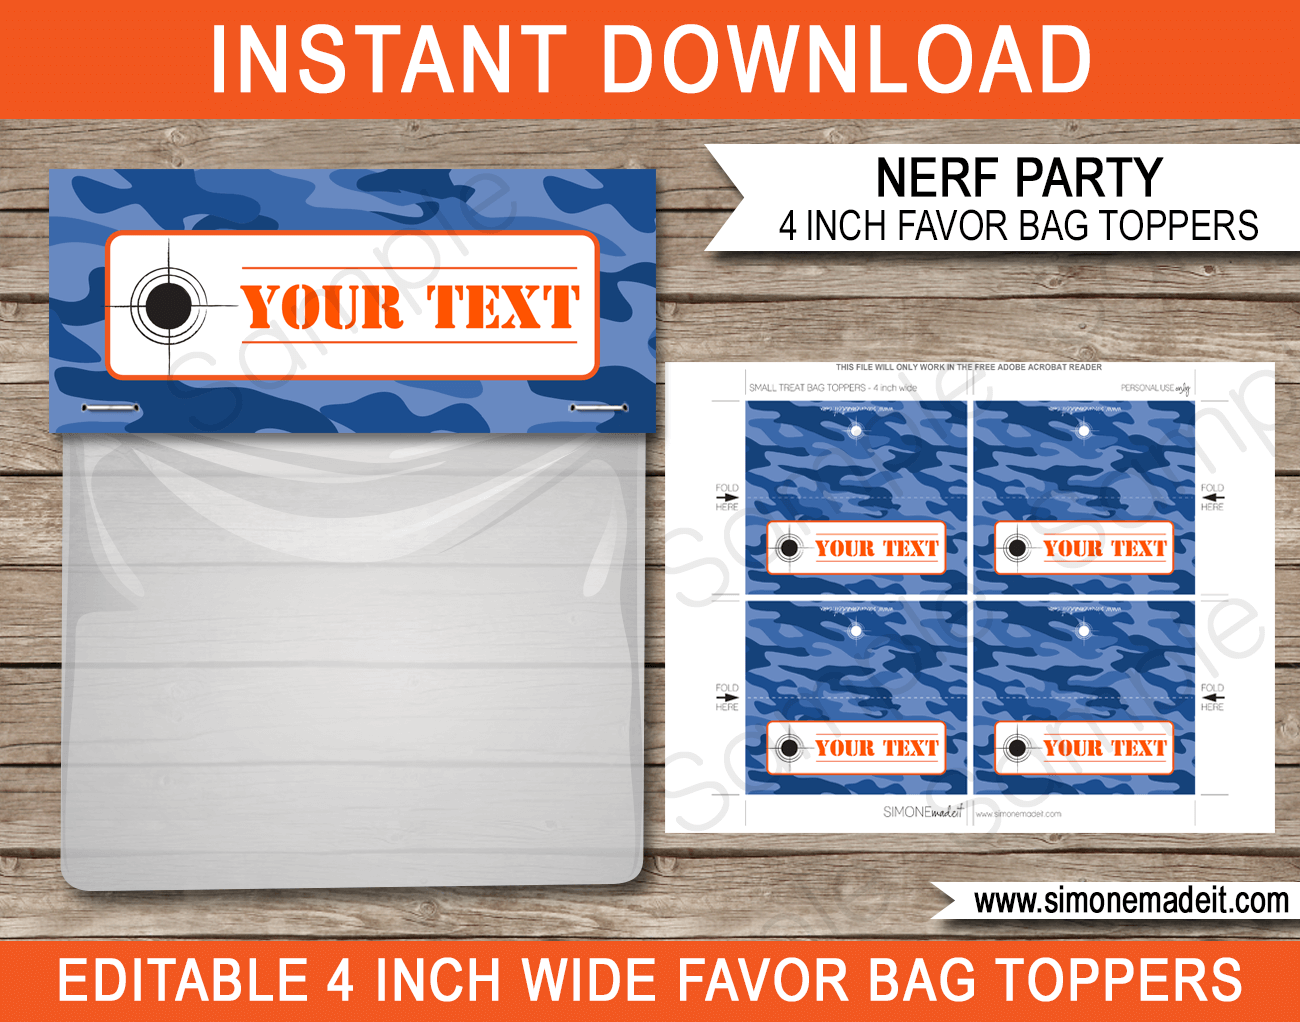 Nerf Favor Bag Toppers | Nerf Birthday Party Favors | Editable DIY Template | $3.00 INSTANT DOWNLOAD via SIMONEmadeit.com